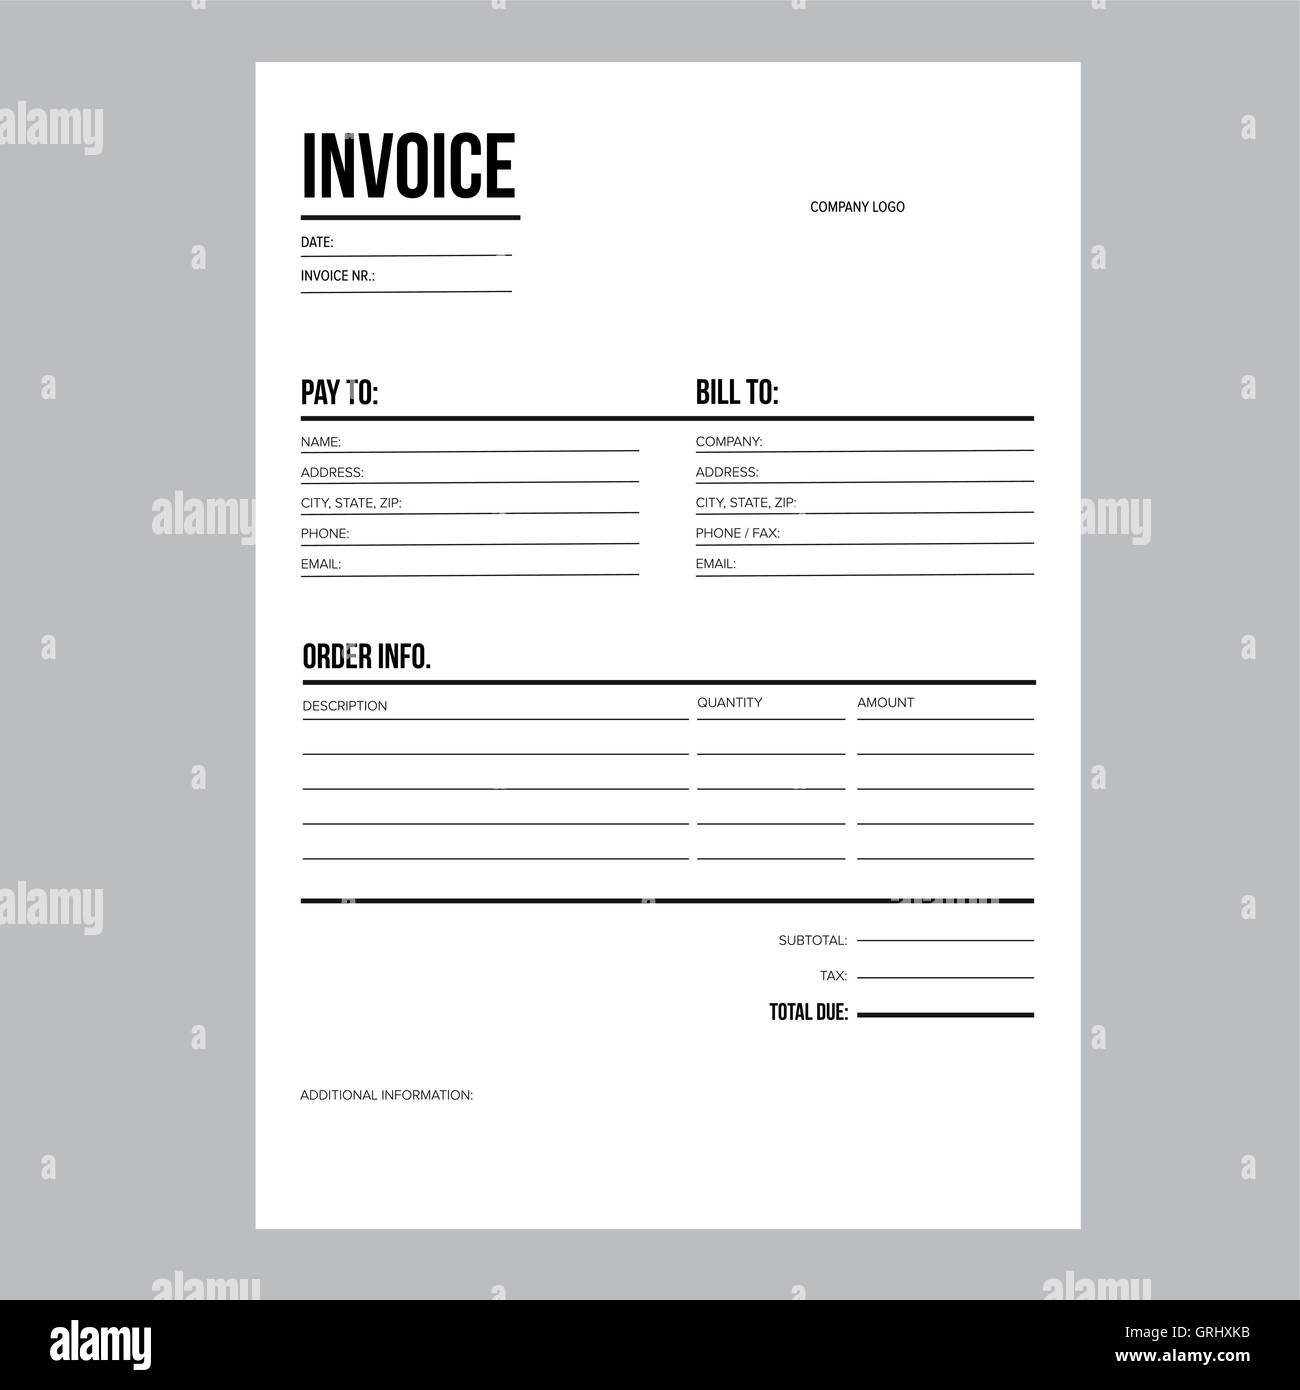 Invoice / business template - A4 European standard paper Stock Vector